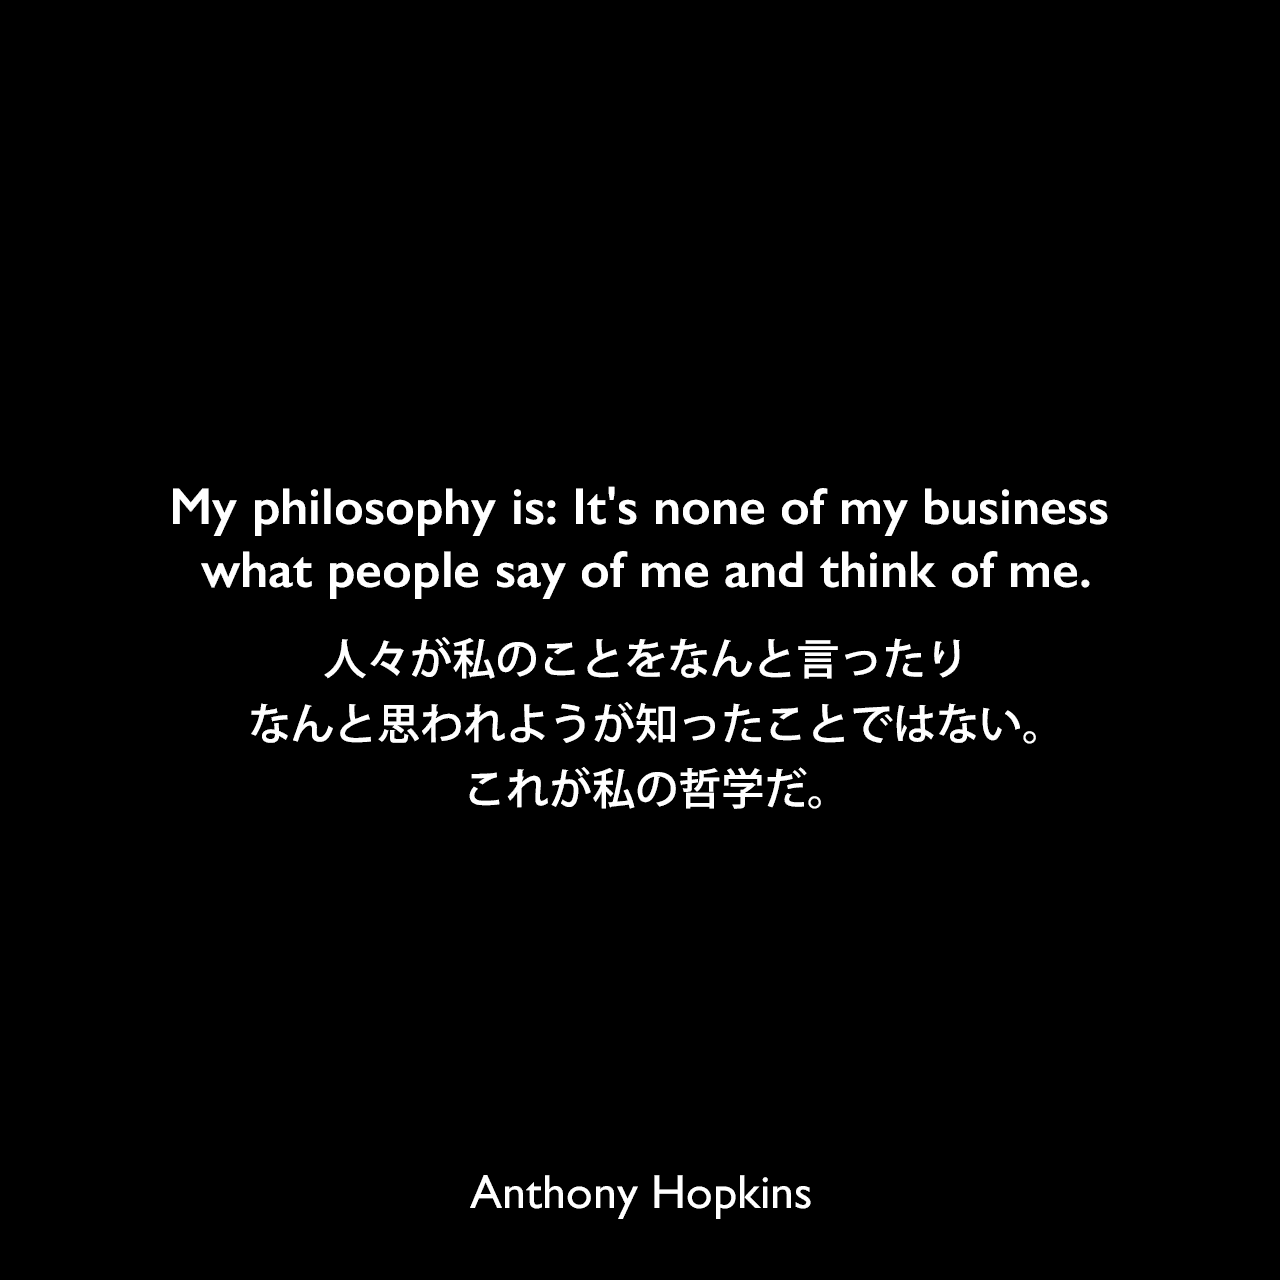 My philosophy is: It’s none of my business what people say of me and think of me.人々が私のことをなんと言ったりなんと思われようが知ったことではない。これが私の哲学だ。